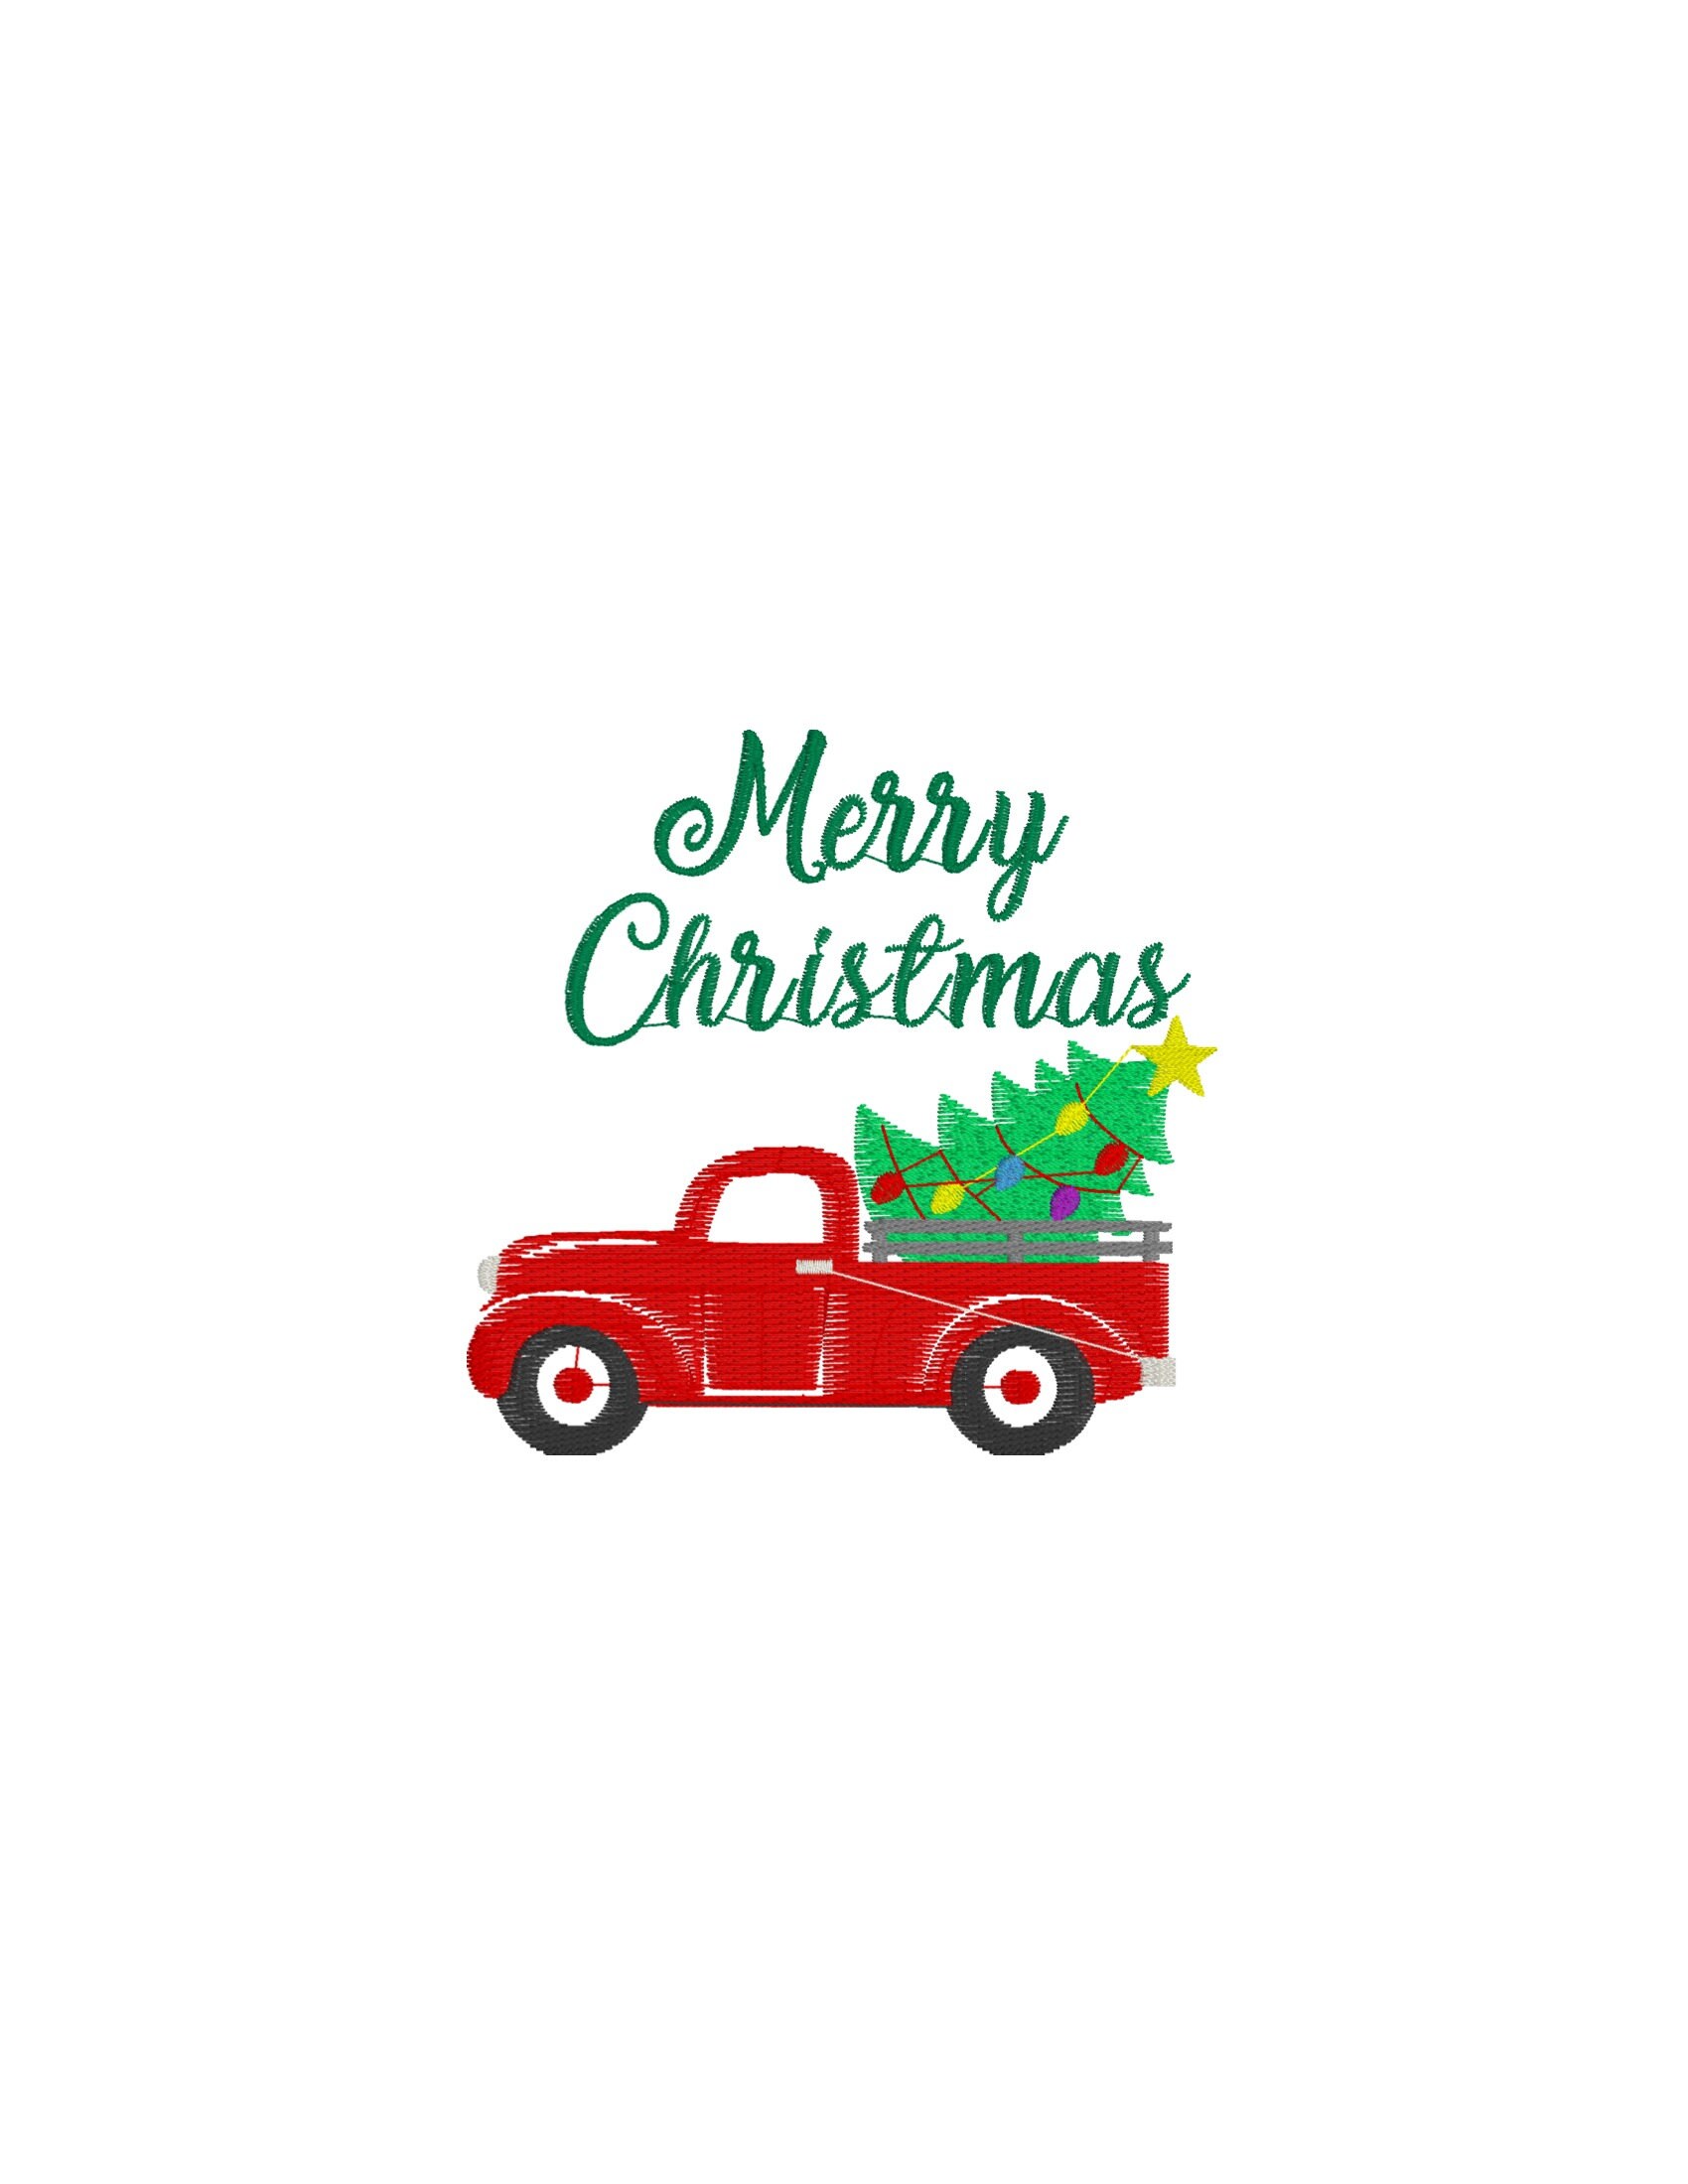 Red Red Pick up Vintage Truck With Christmas Tree and Lights